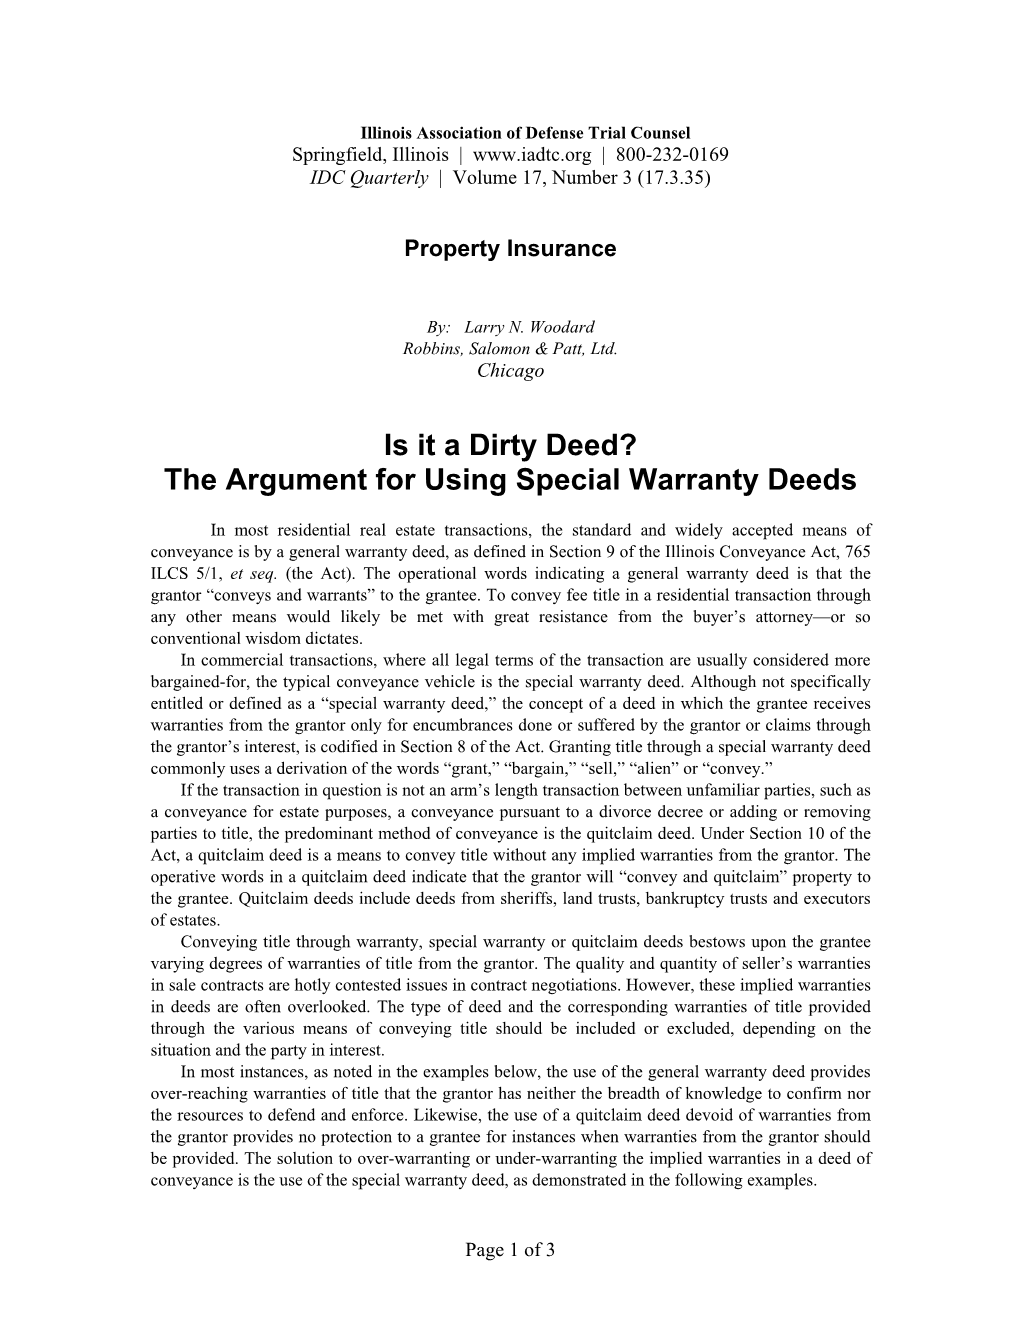 The Argument for Using Special Warranty Deeds